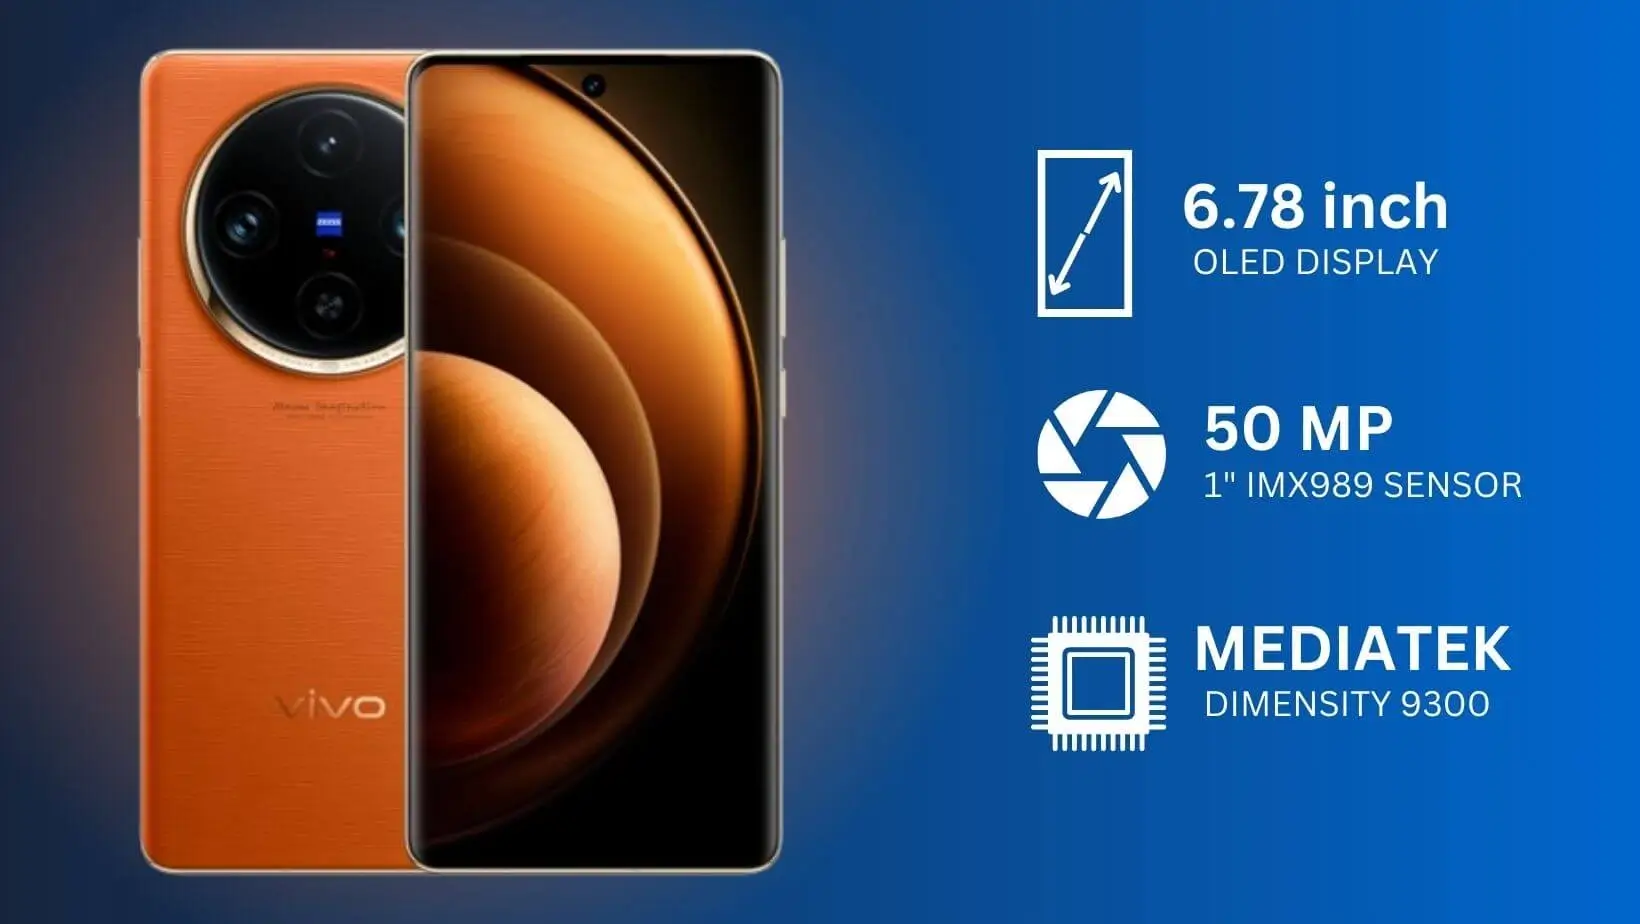 Vivo x100 Pro Smartphone specification in detail